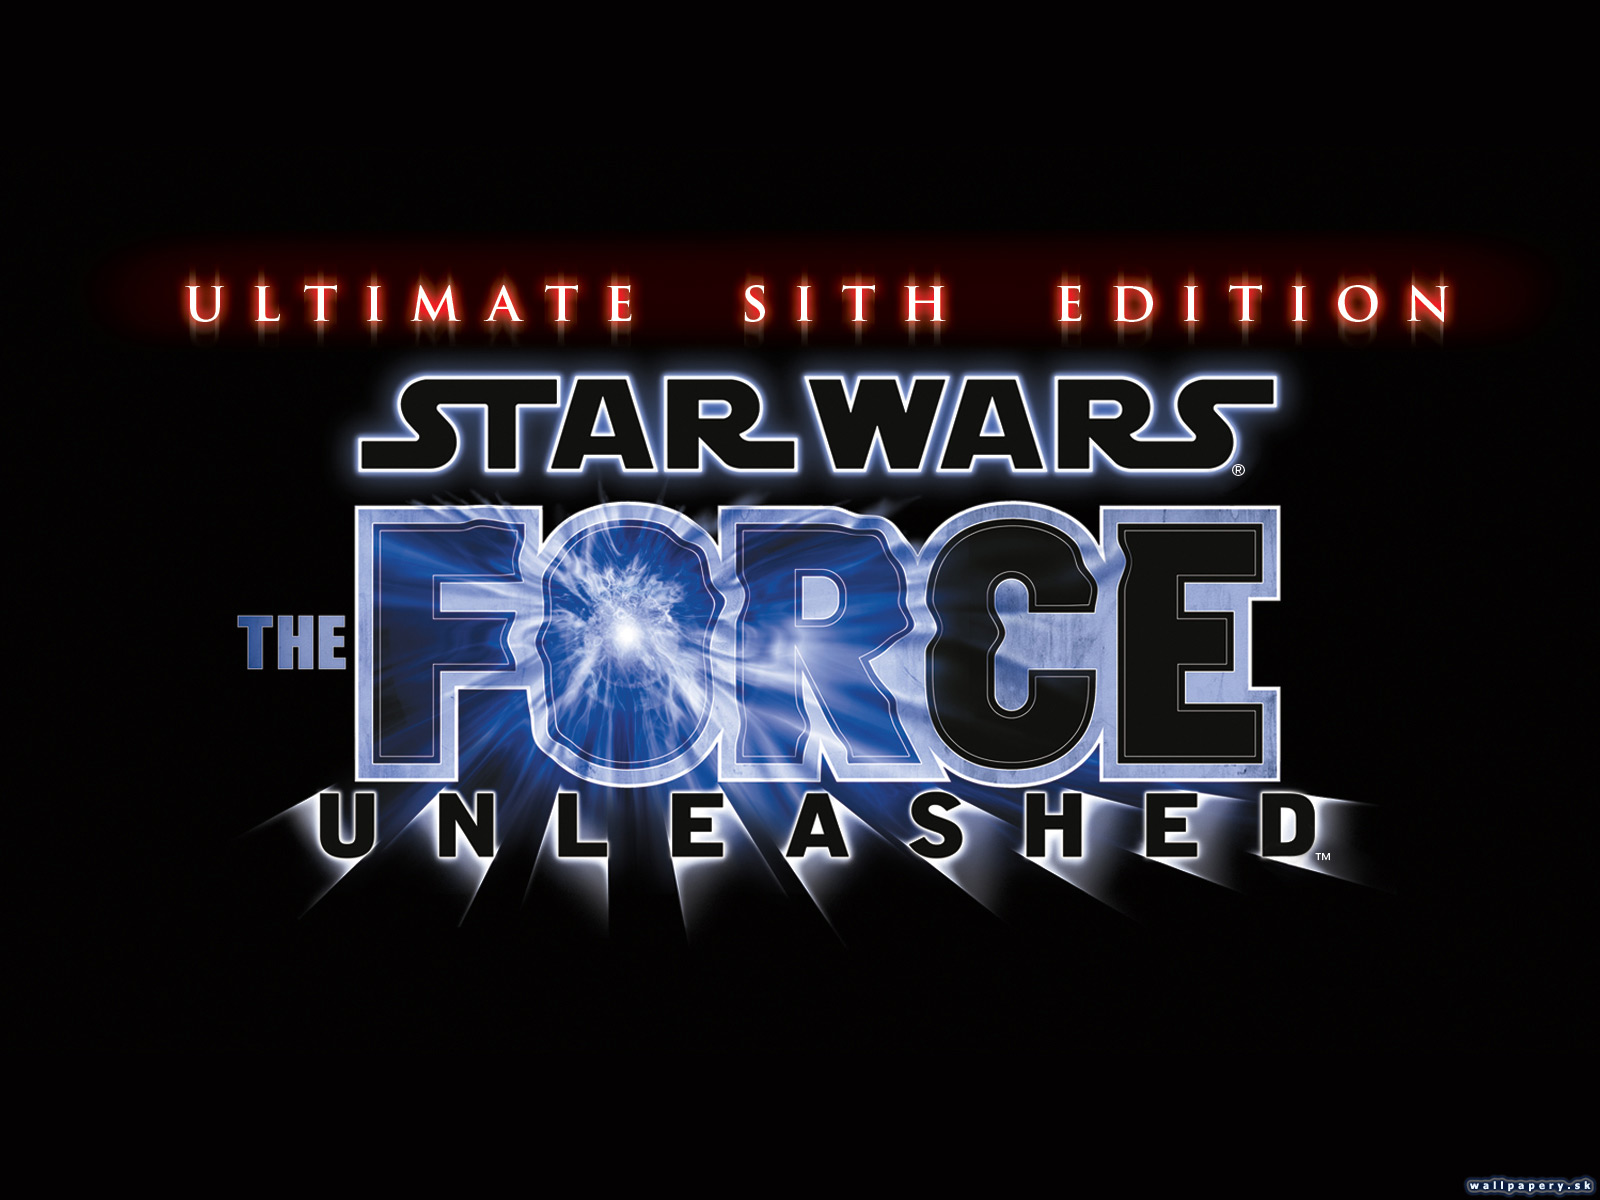 Star Wars: The Force Unleashed - Ultimate Sith Edition - wallpaper 2